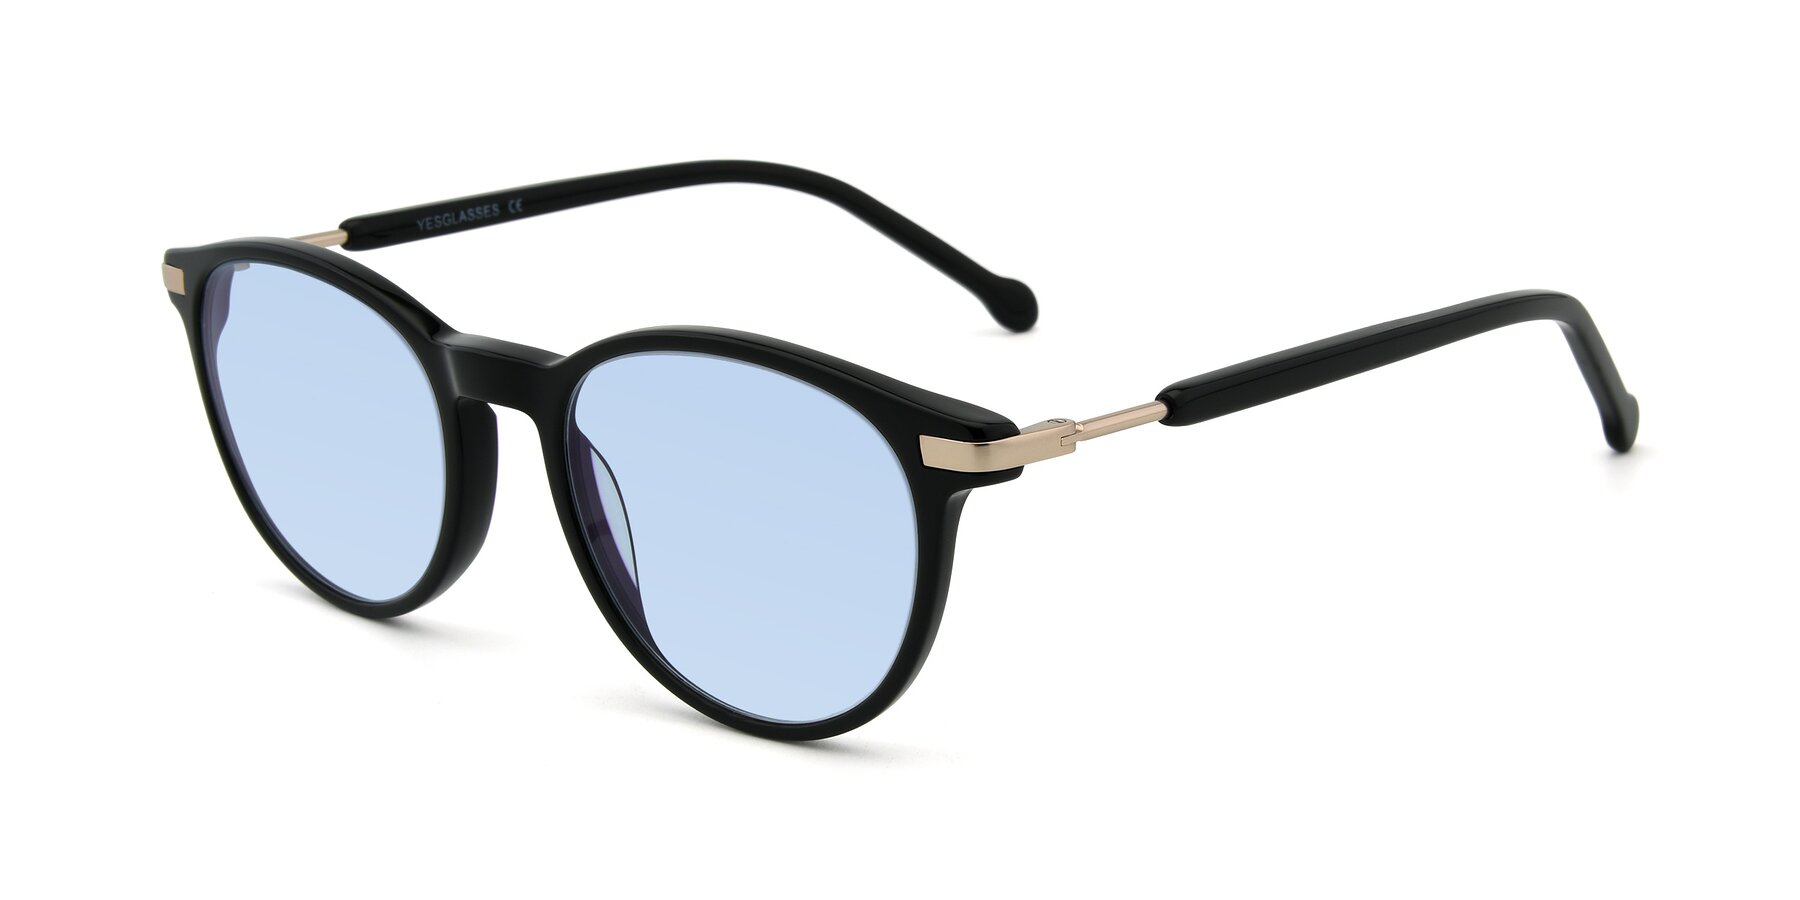 Angle of 17429 in Black with Light Blue Tinted Lenses